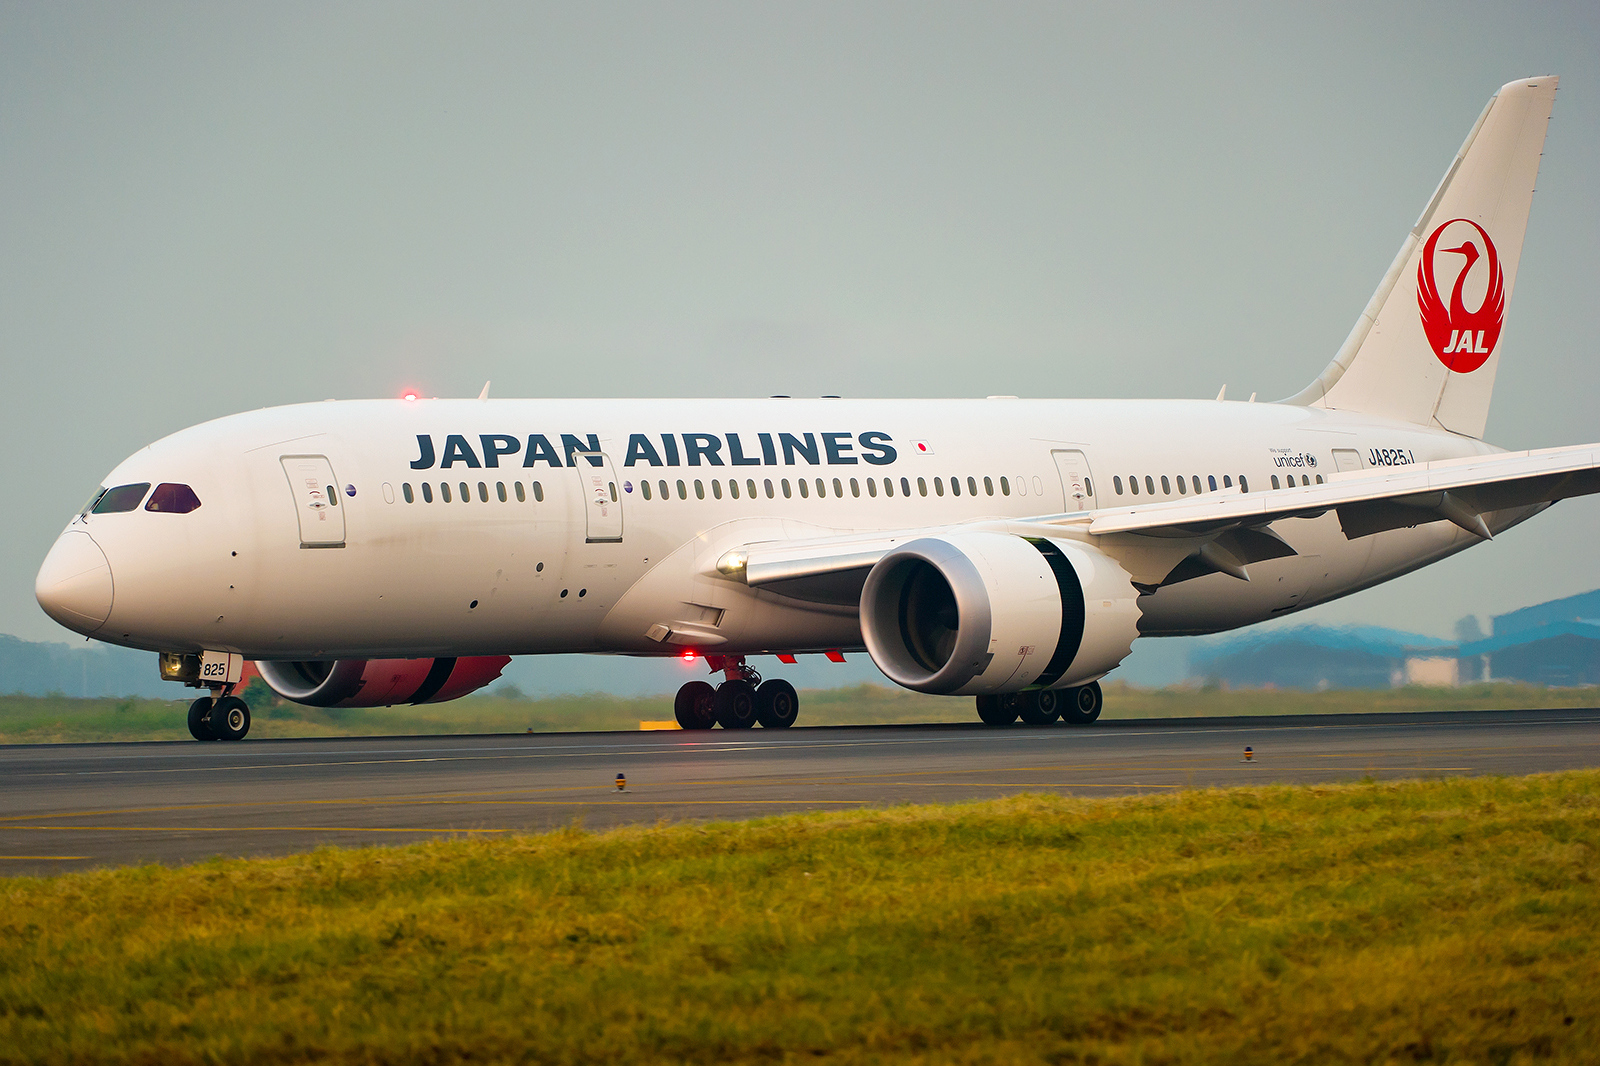 Japan Airlines will begin Bangalore flights in 2020 – Bangalore Aviation